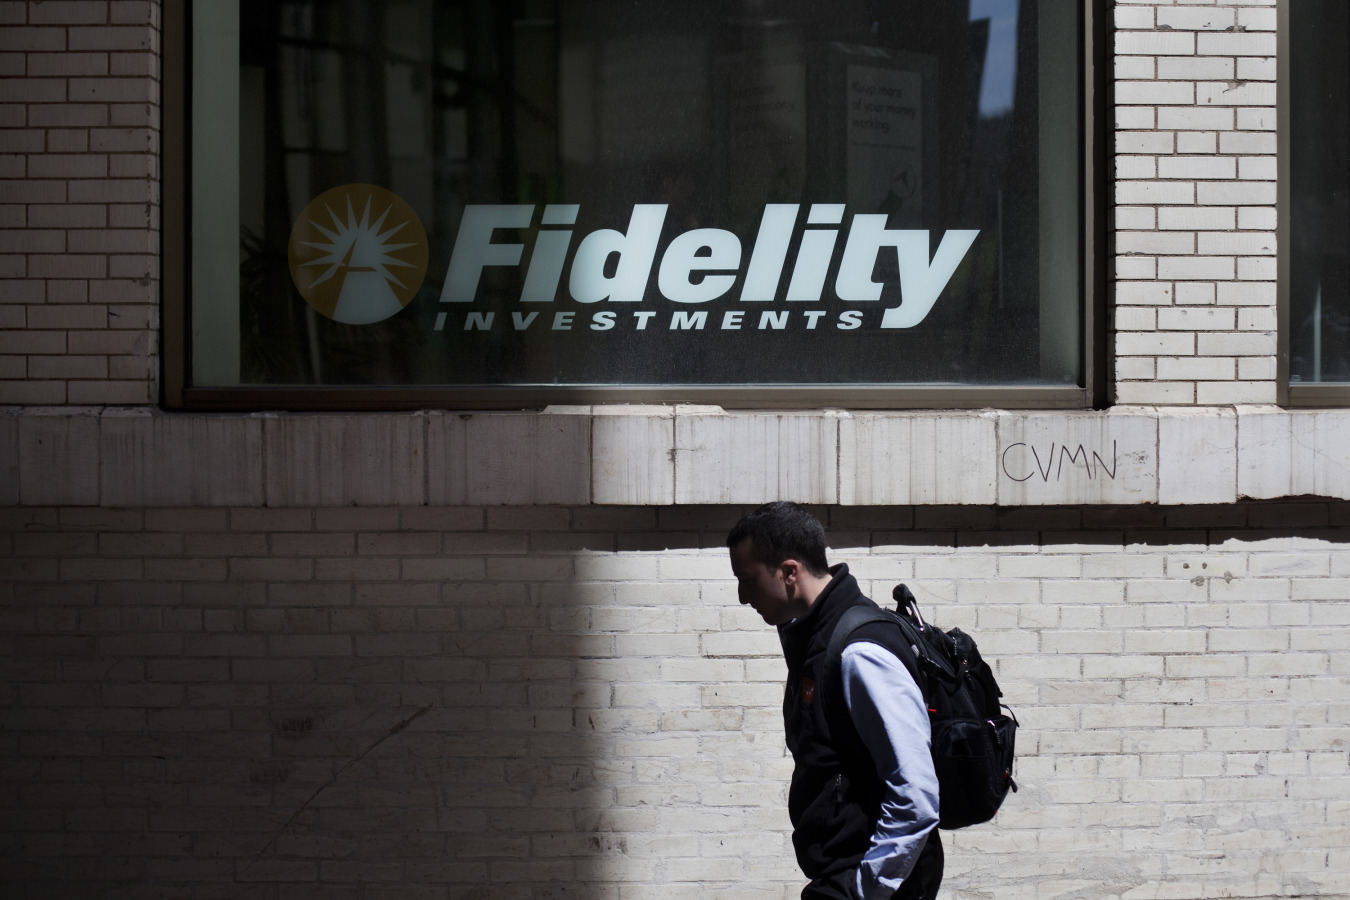 Fidelity Investments was also given a low rating for not actively engaging with firms by writing letters or sponsoring shareholder resolutions.